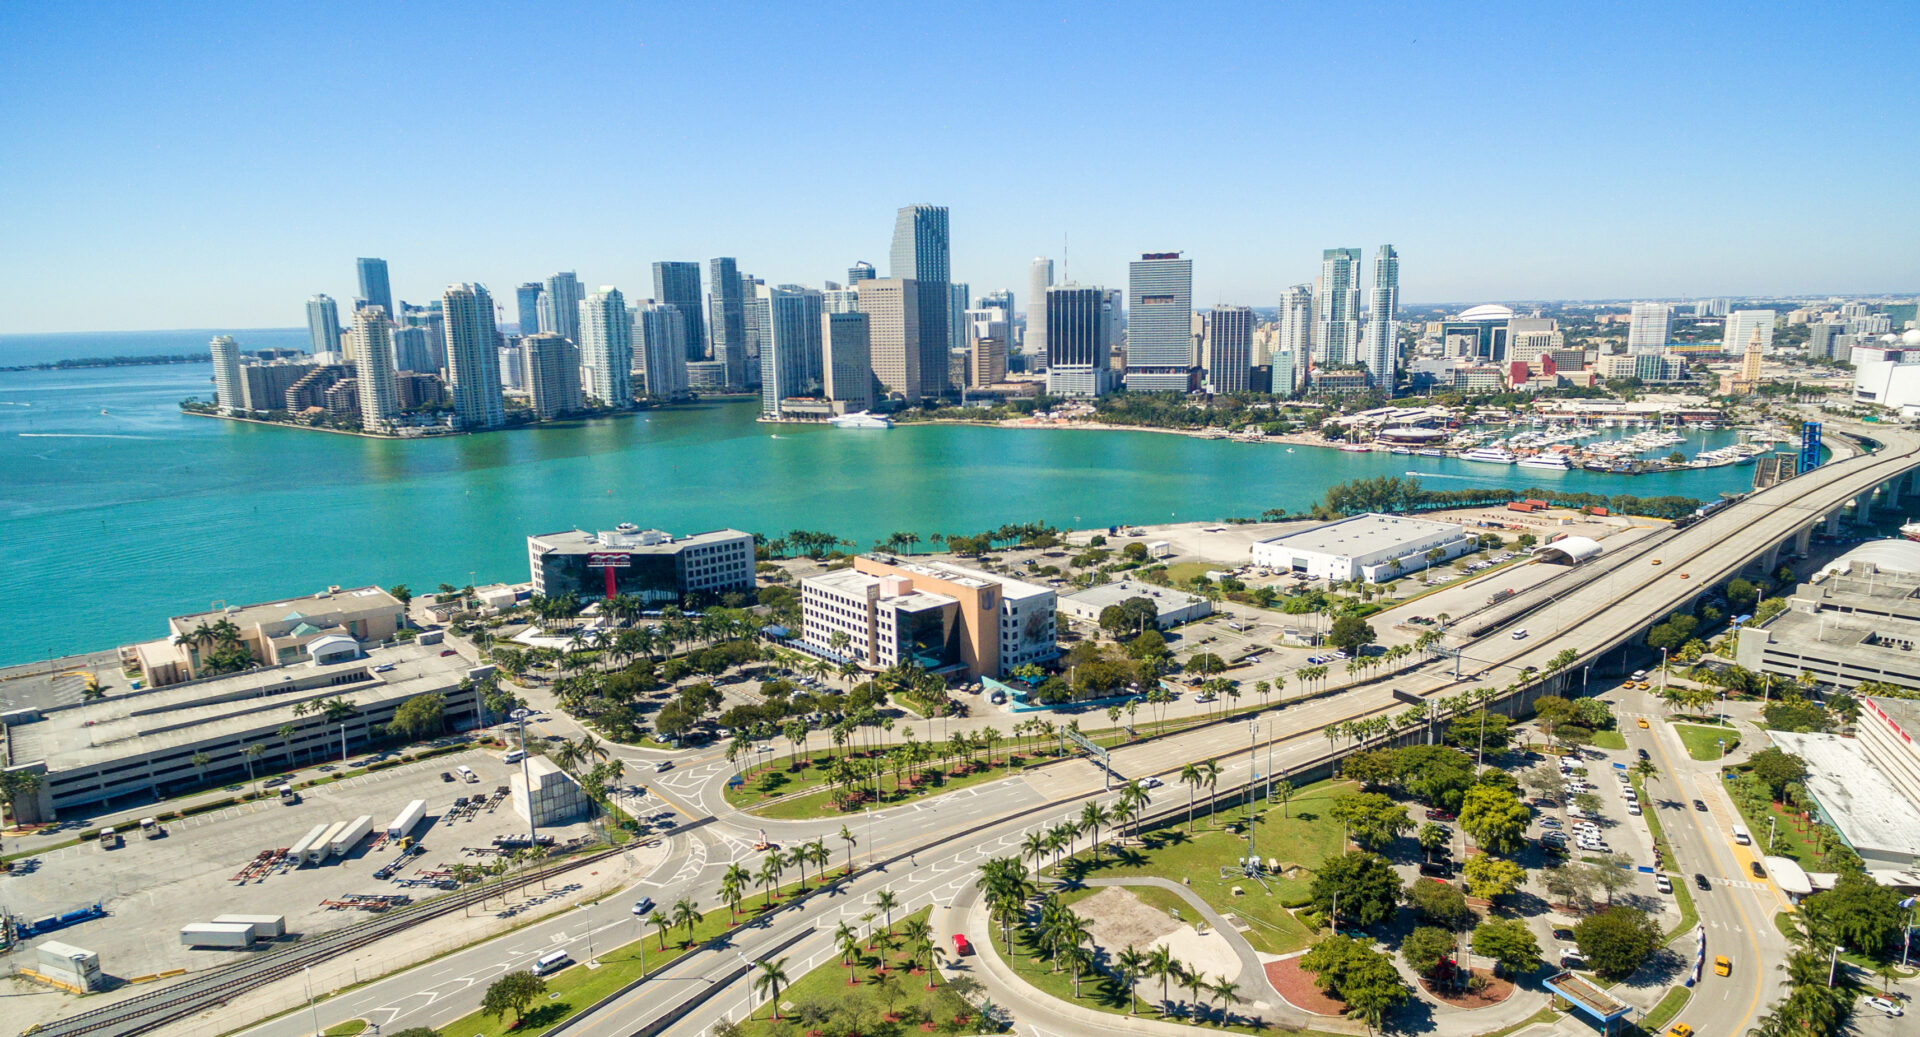 Awesome aerial view of Miami skyline from helicopter.